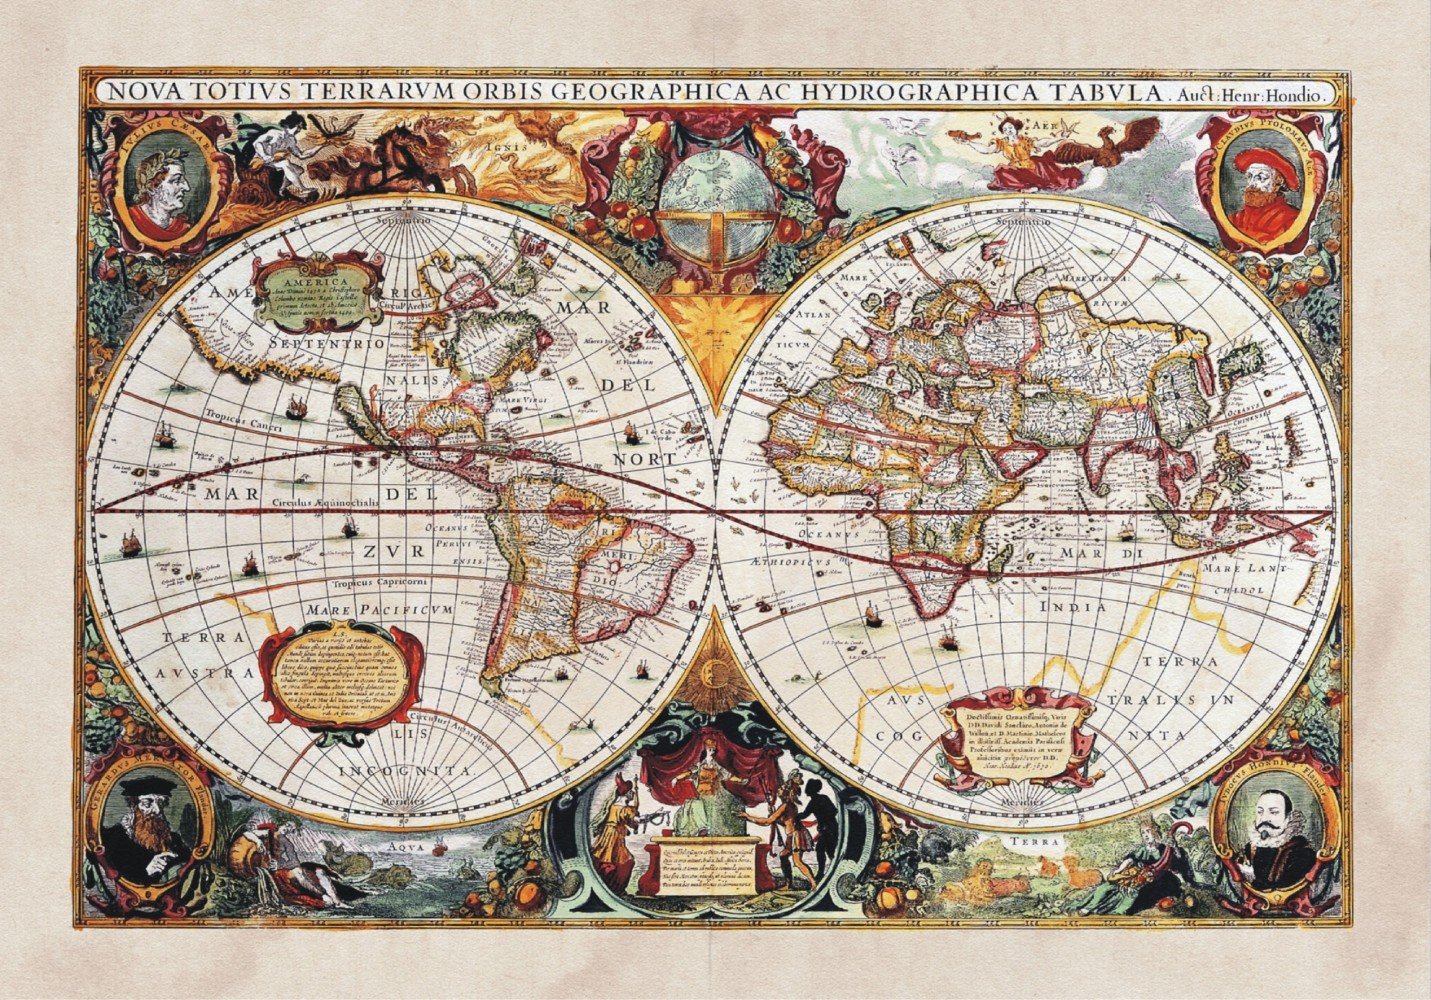 XXL Poster Wall mural wallpaper history world map geography photo 160